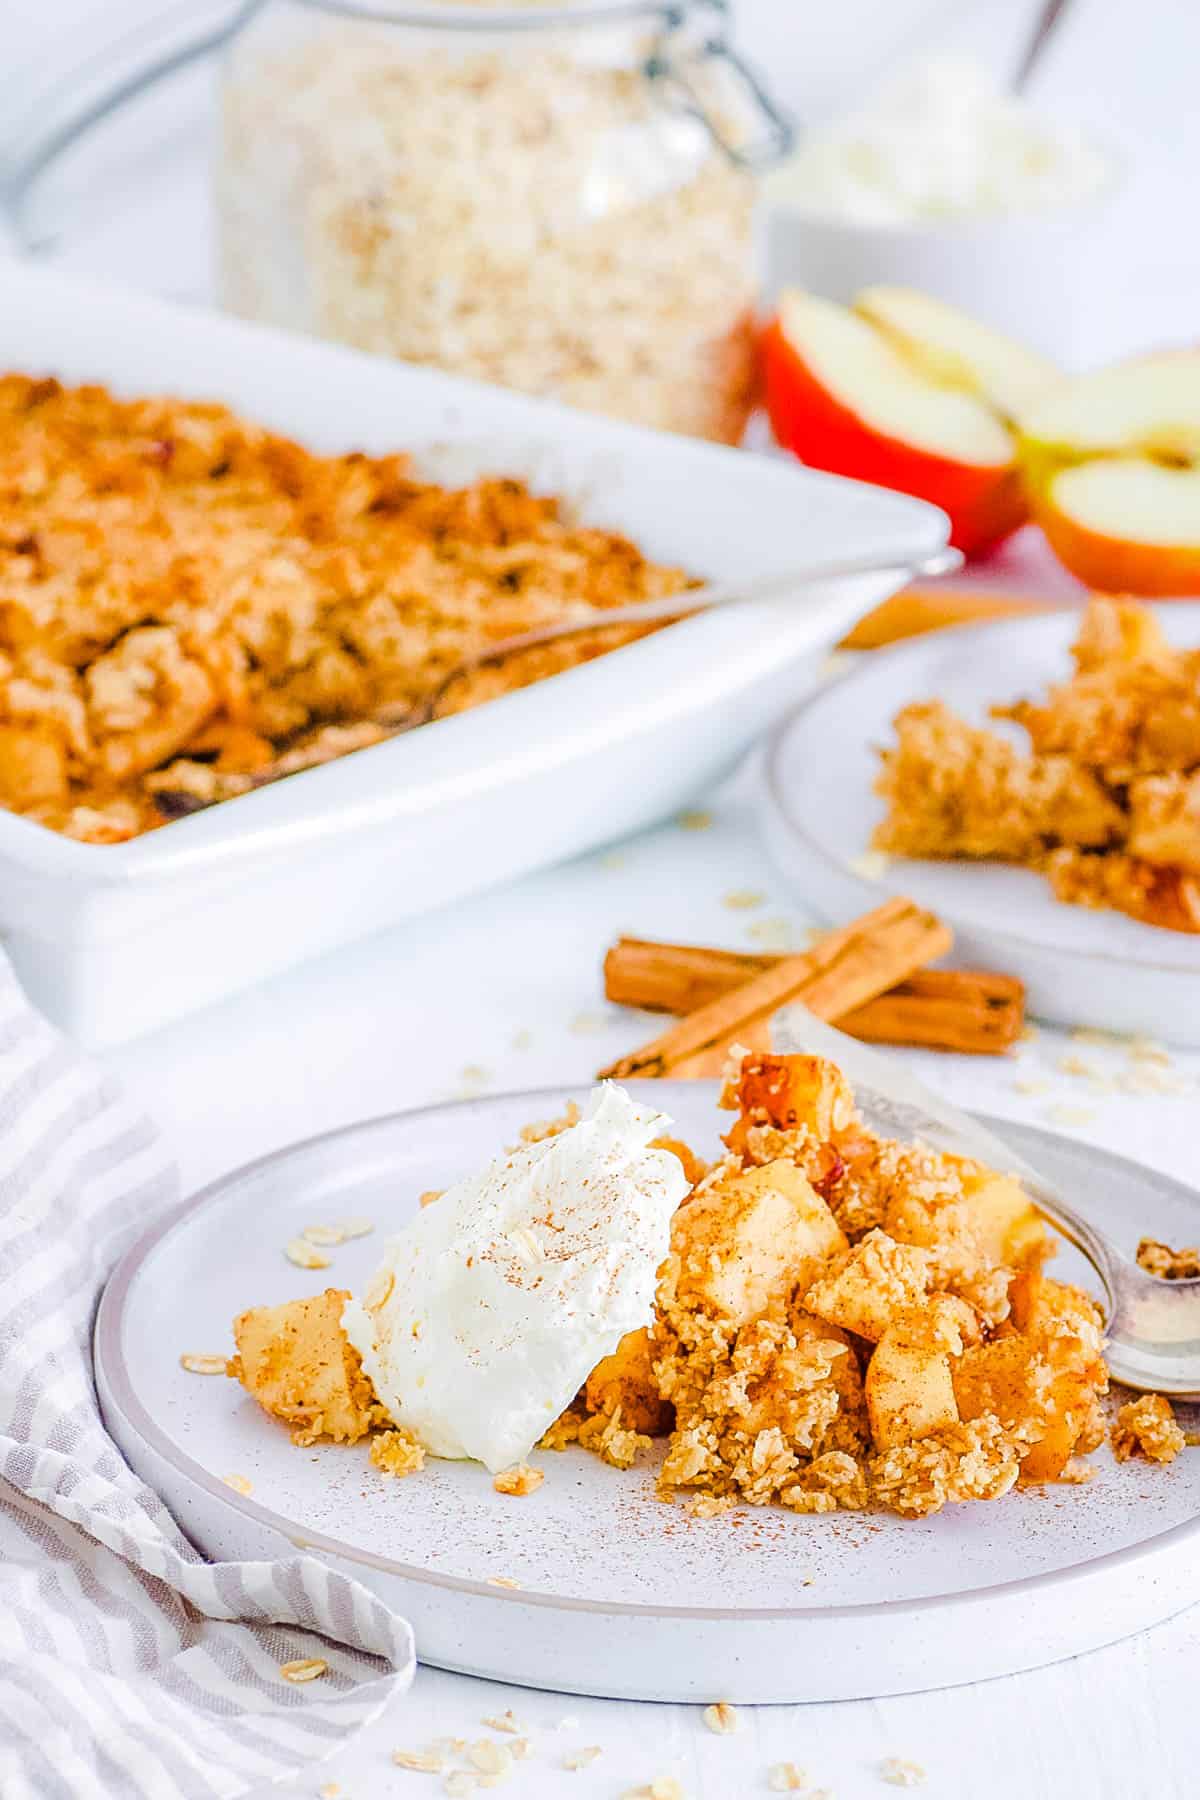 healthy, easy, gluten free, dairy free, vegan apple crumble recipe (apple crisp) on a plate with whipped cream